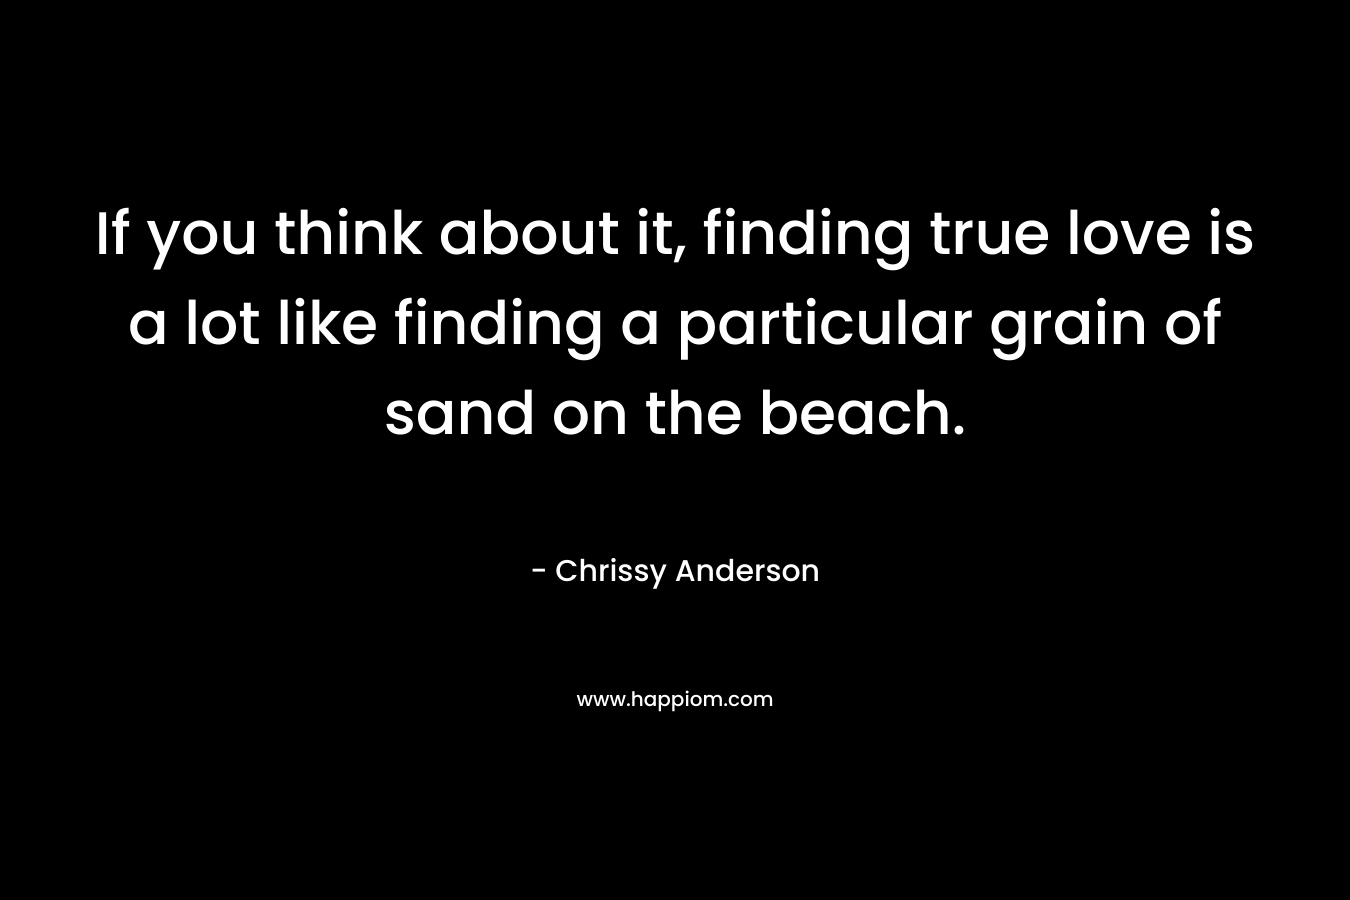 If you think about it, finding true love is a lot like finding a particular grain of sand on the beach. – Chrissy Anderson